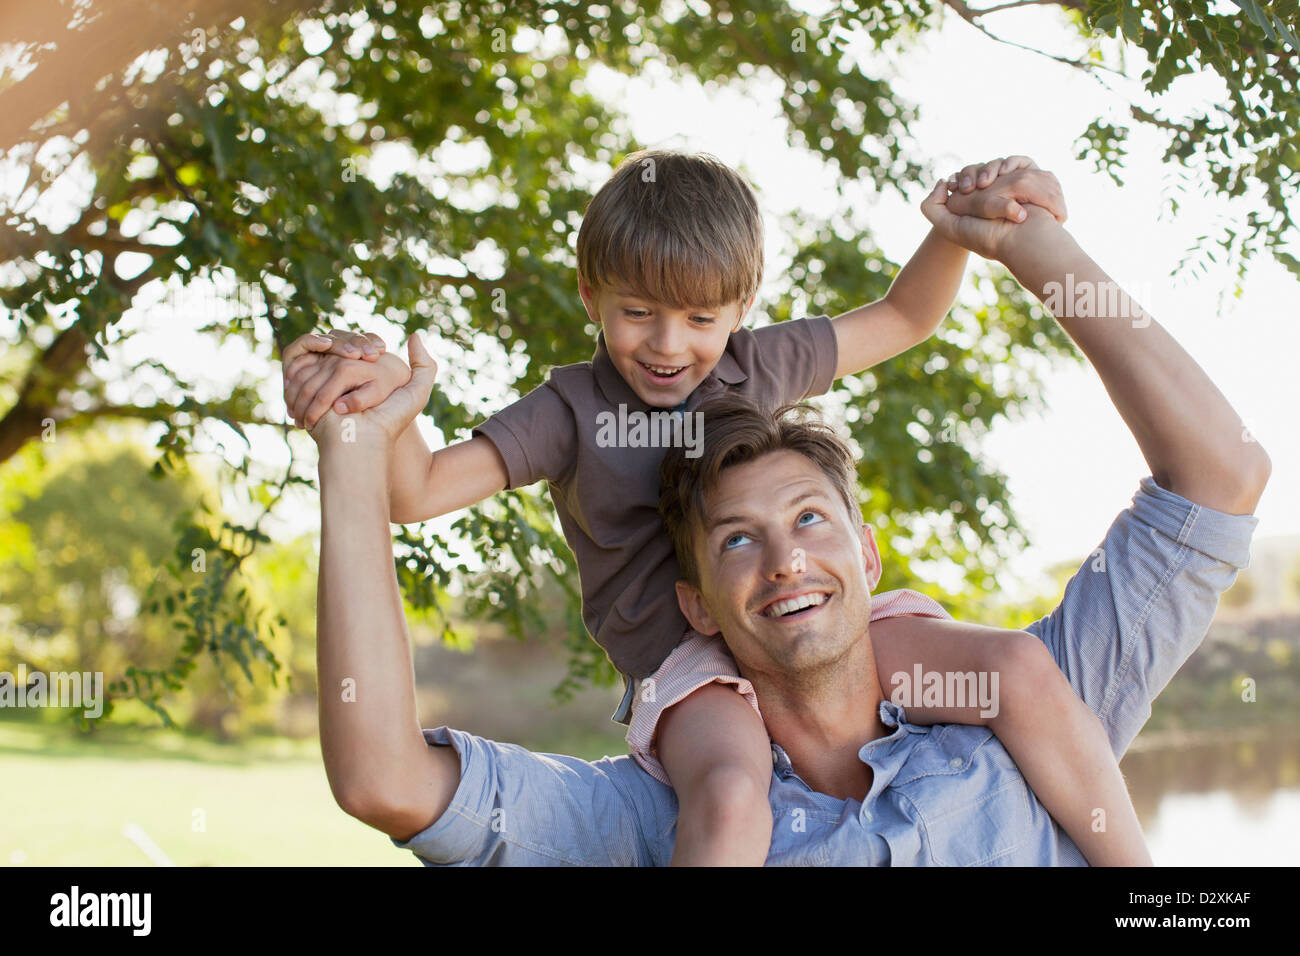 Smiling father carrying son on shoulders under tree Stock Photo